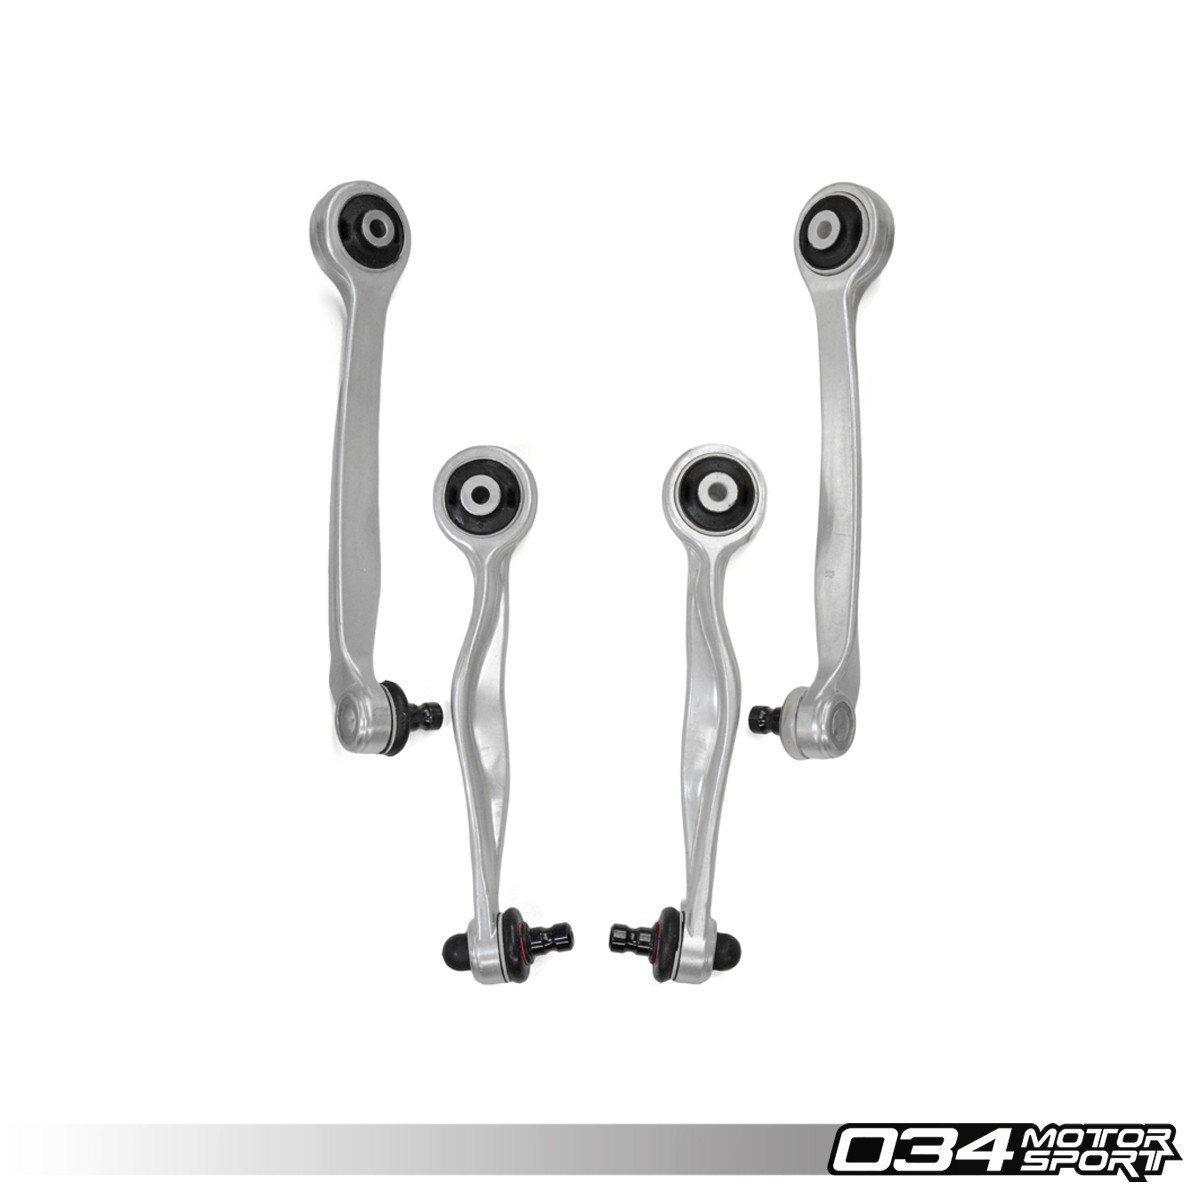 Control Arm Kit, Density Line, Uppers Only, Oe Audi/Vw B5/B6/B7 Audi A4/S4/RS4, C5 A6/S6, B5 Passat-A Little Tuning Co